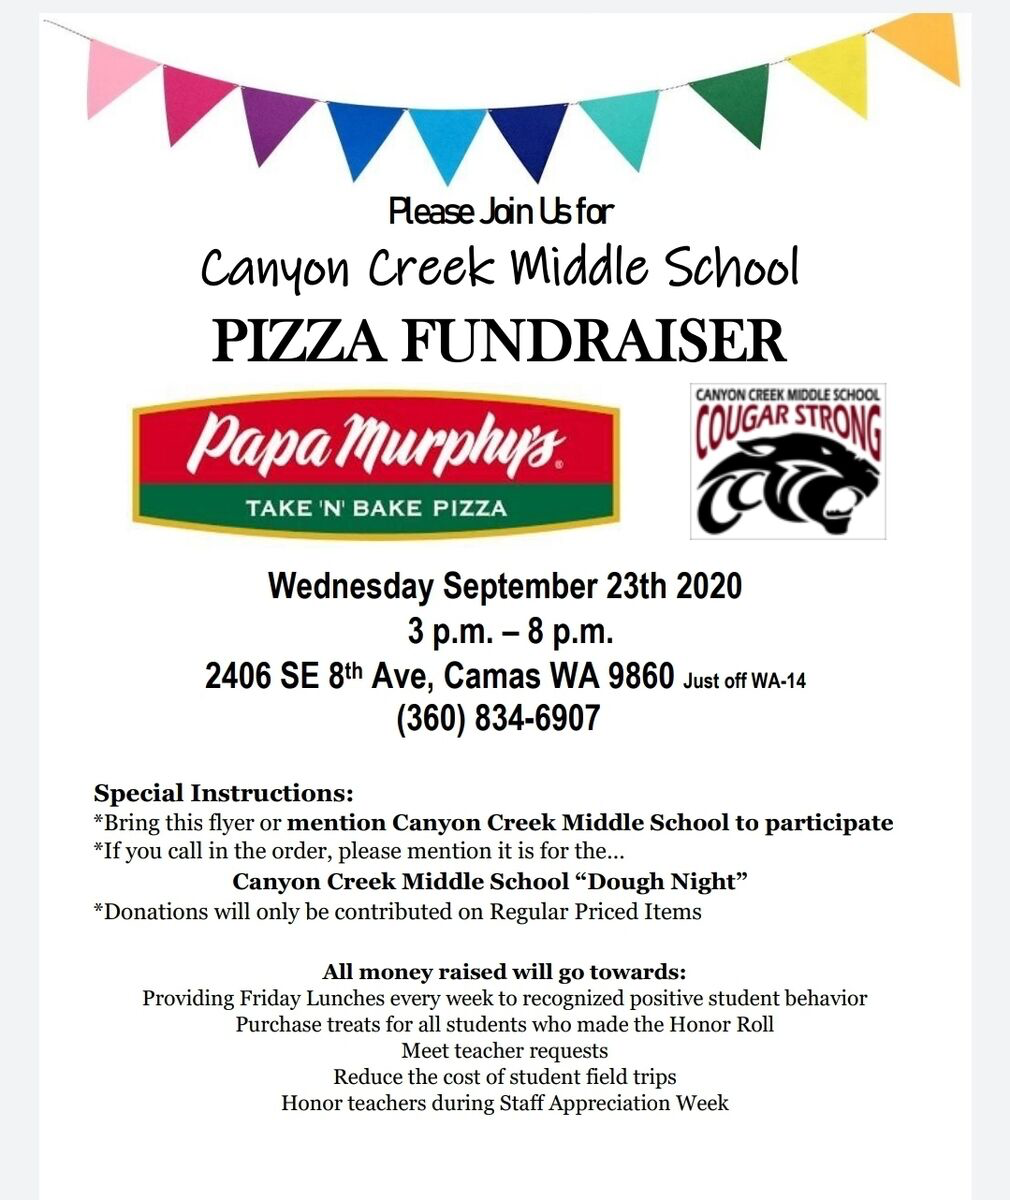 Join us for "Dough Night" Wednesday, September 23rd, 3-8pm. A portion of all sales during this event will be donated back to CCMS.